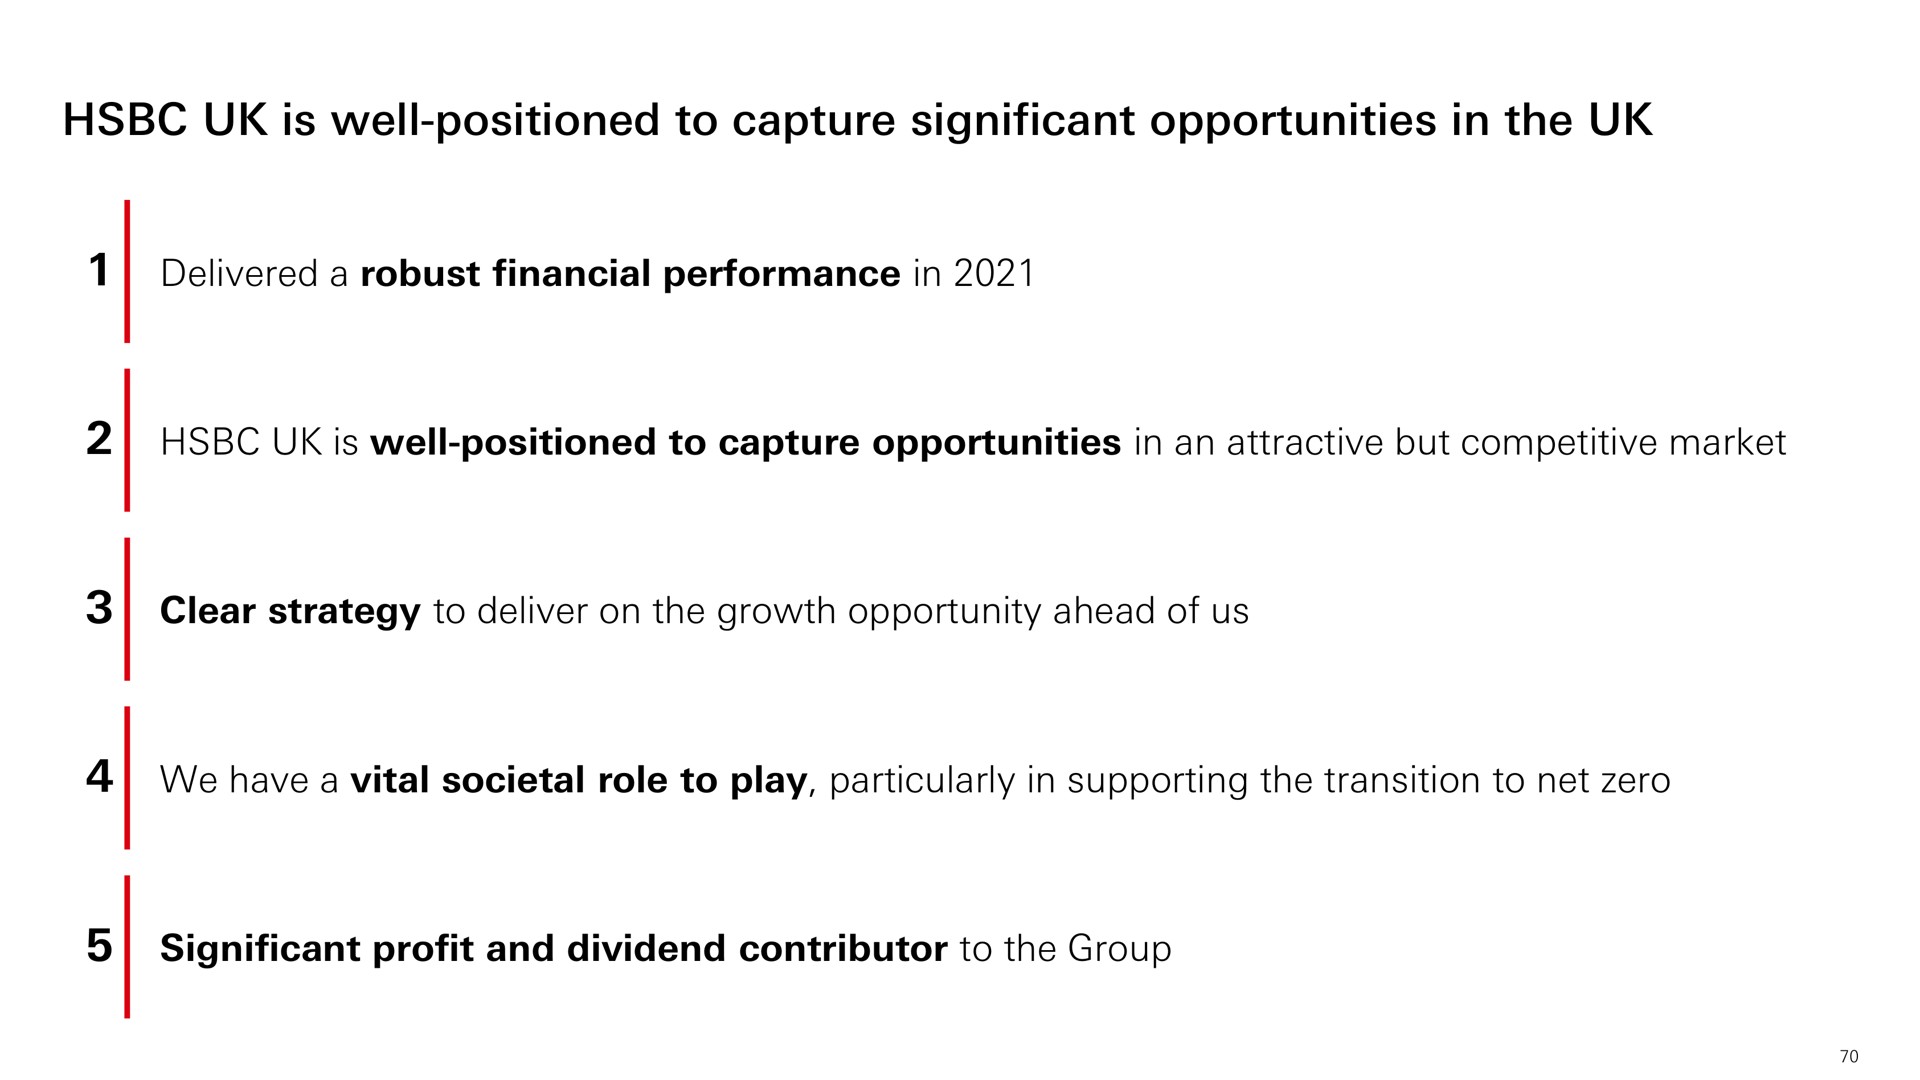 is well positioned to capture significant opportunities in the clear strategy deliver on growth opportunity ahead of us | HSBC